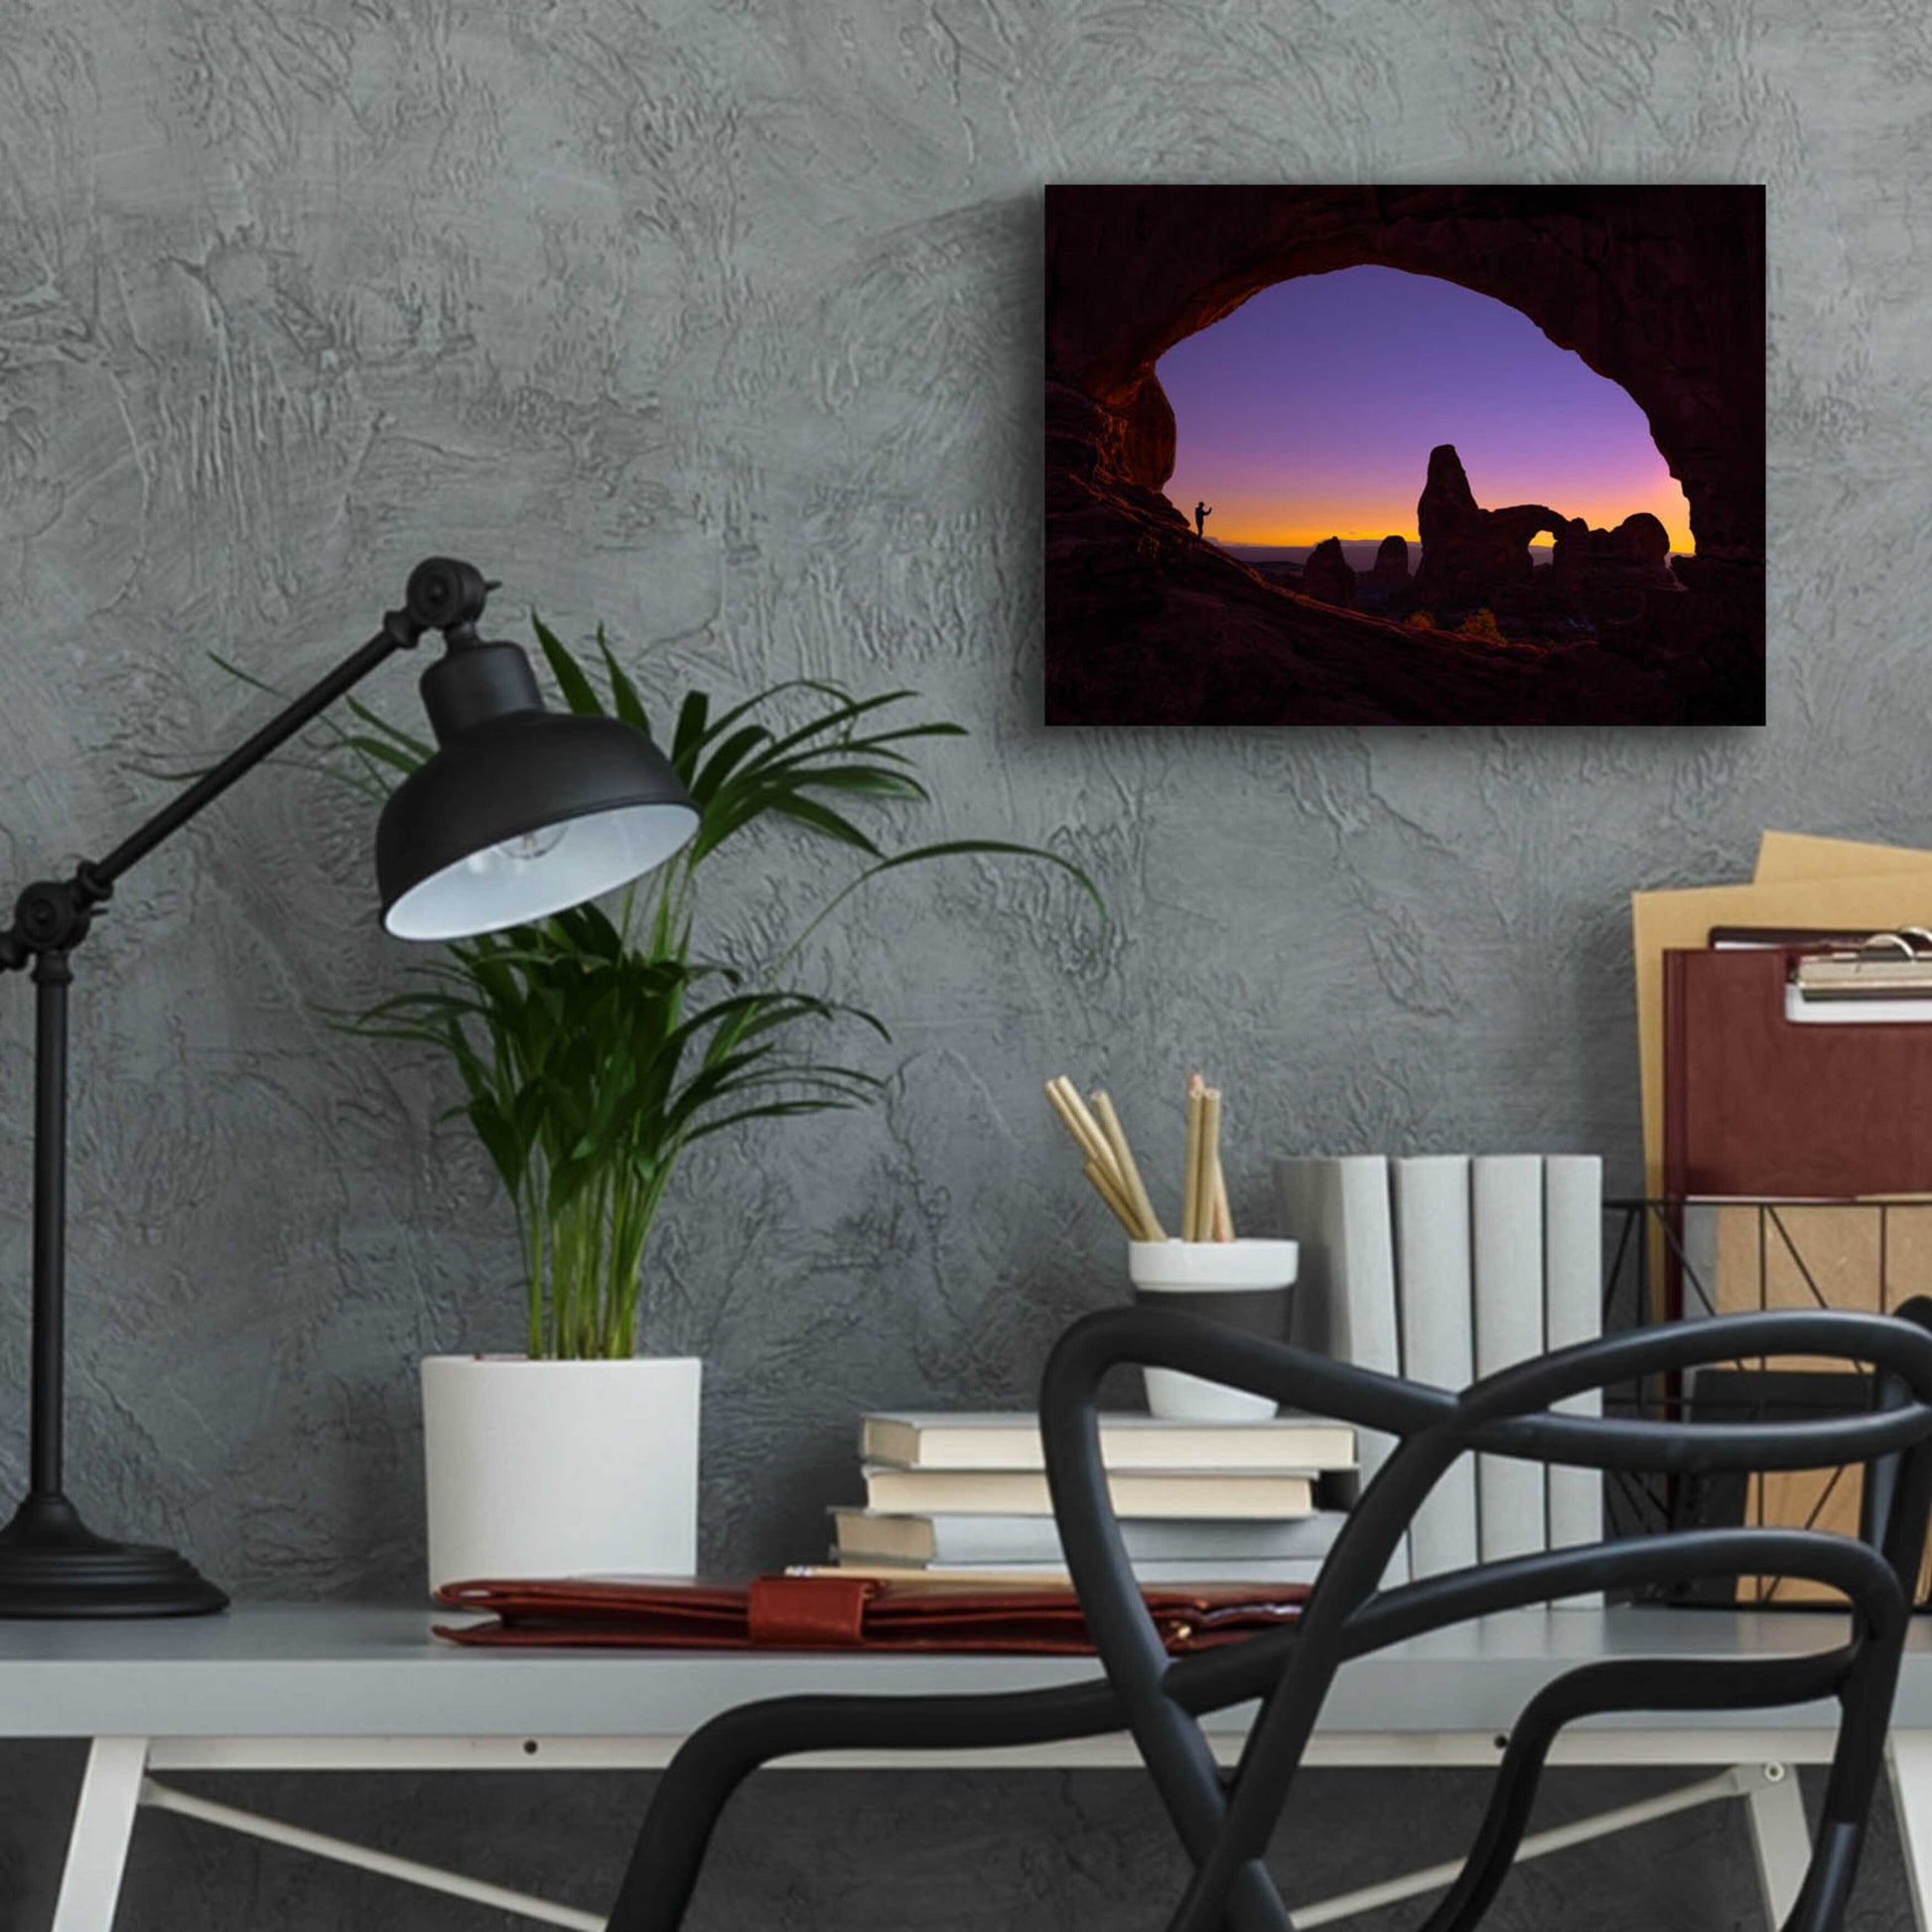 Epic Art 'Arches Witness - Arches National Park' by Darren White, Acrylic Glass Wall Art,16x12